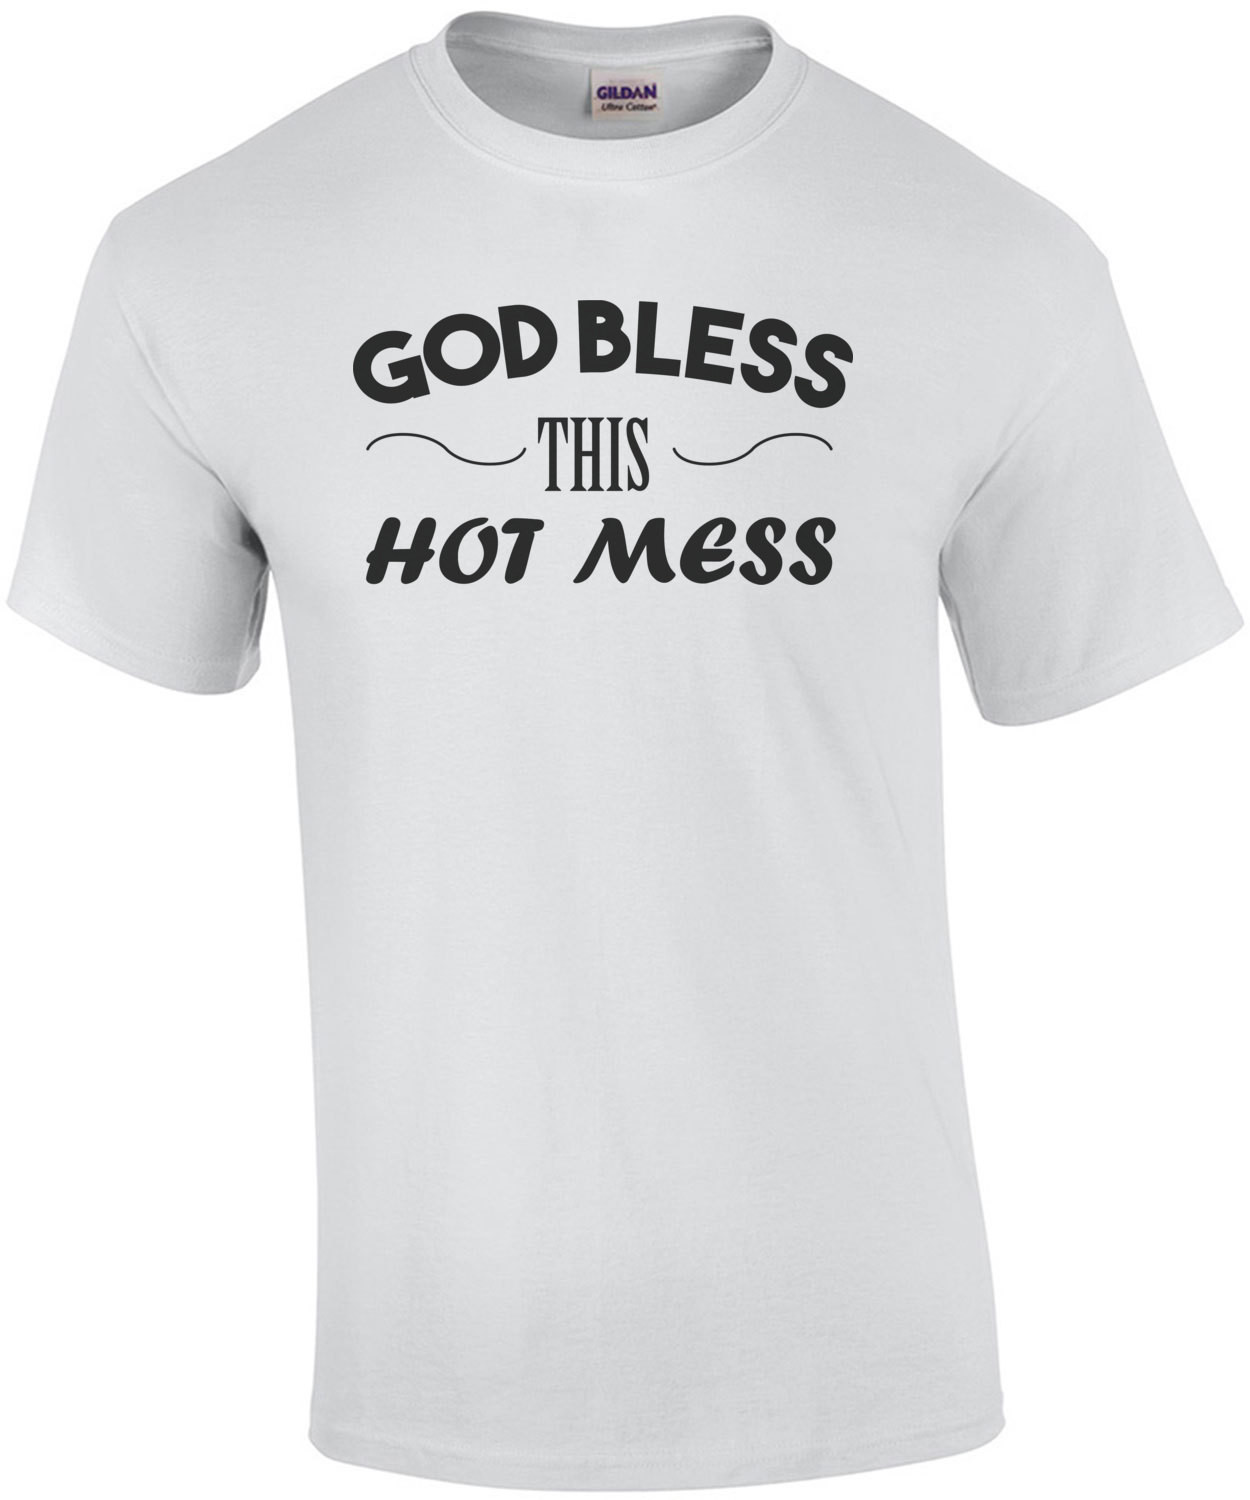 God bless this hot mess. Funny T-Shirt